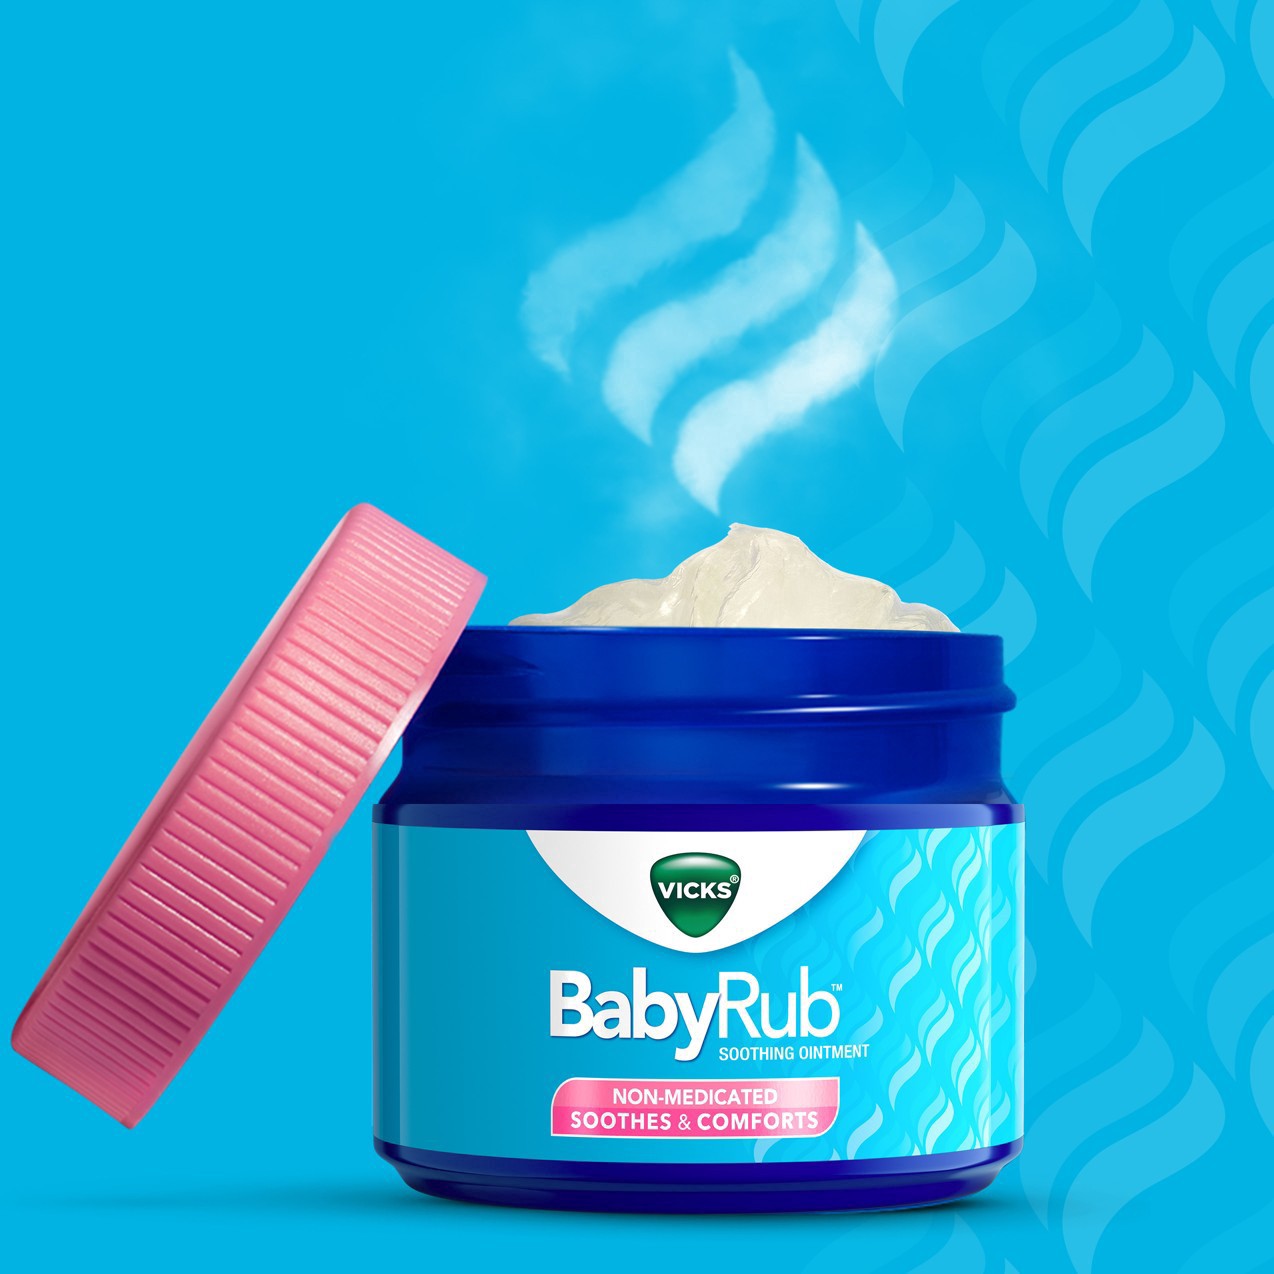 slide 3 of 78, Vicks BabyRub, Chest Rub Ointment with Soothing Aloe, Eucalyptus, Lavender, and Rosemary, from The Makers of VapoRub, 1.76 oz, 1.76 oz